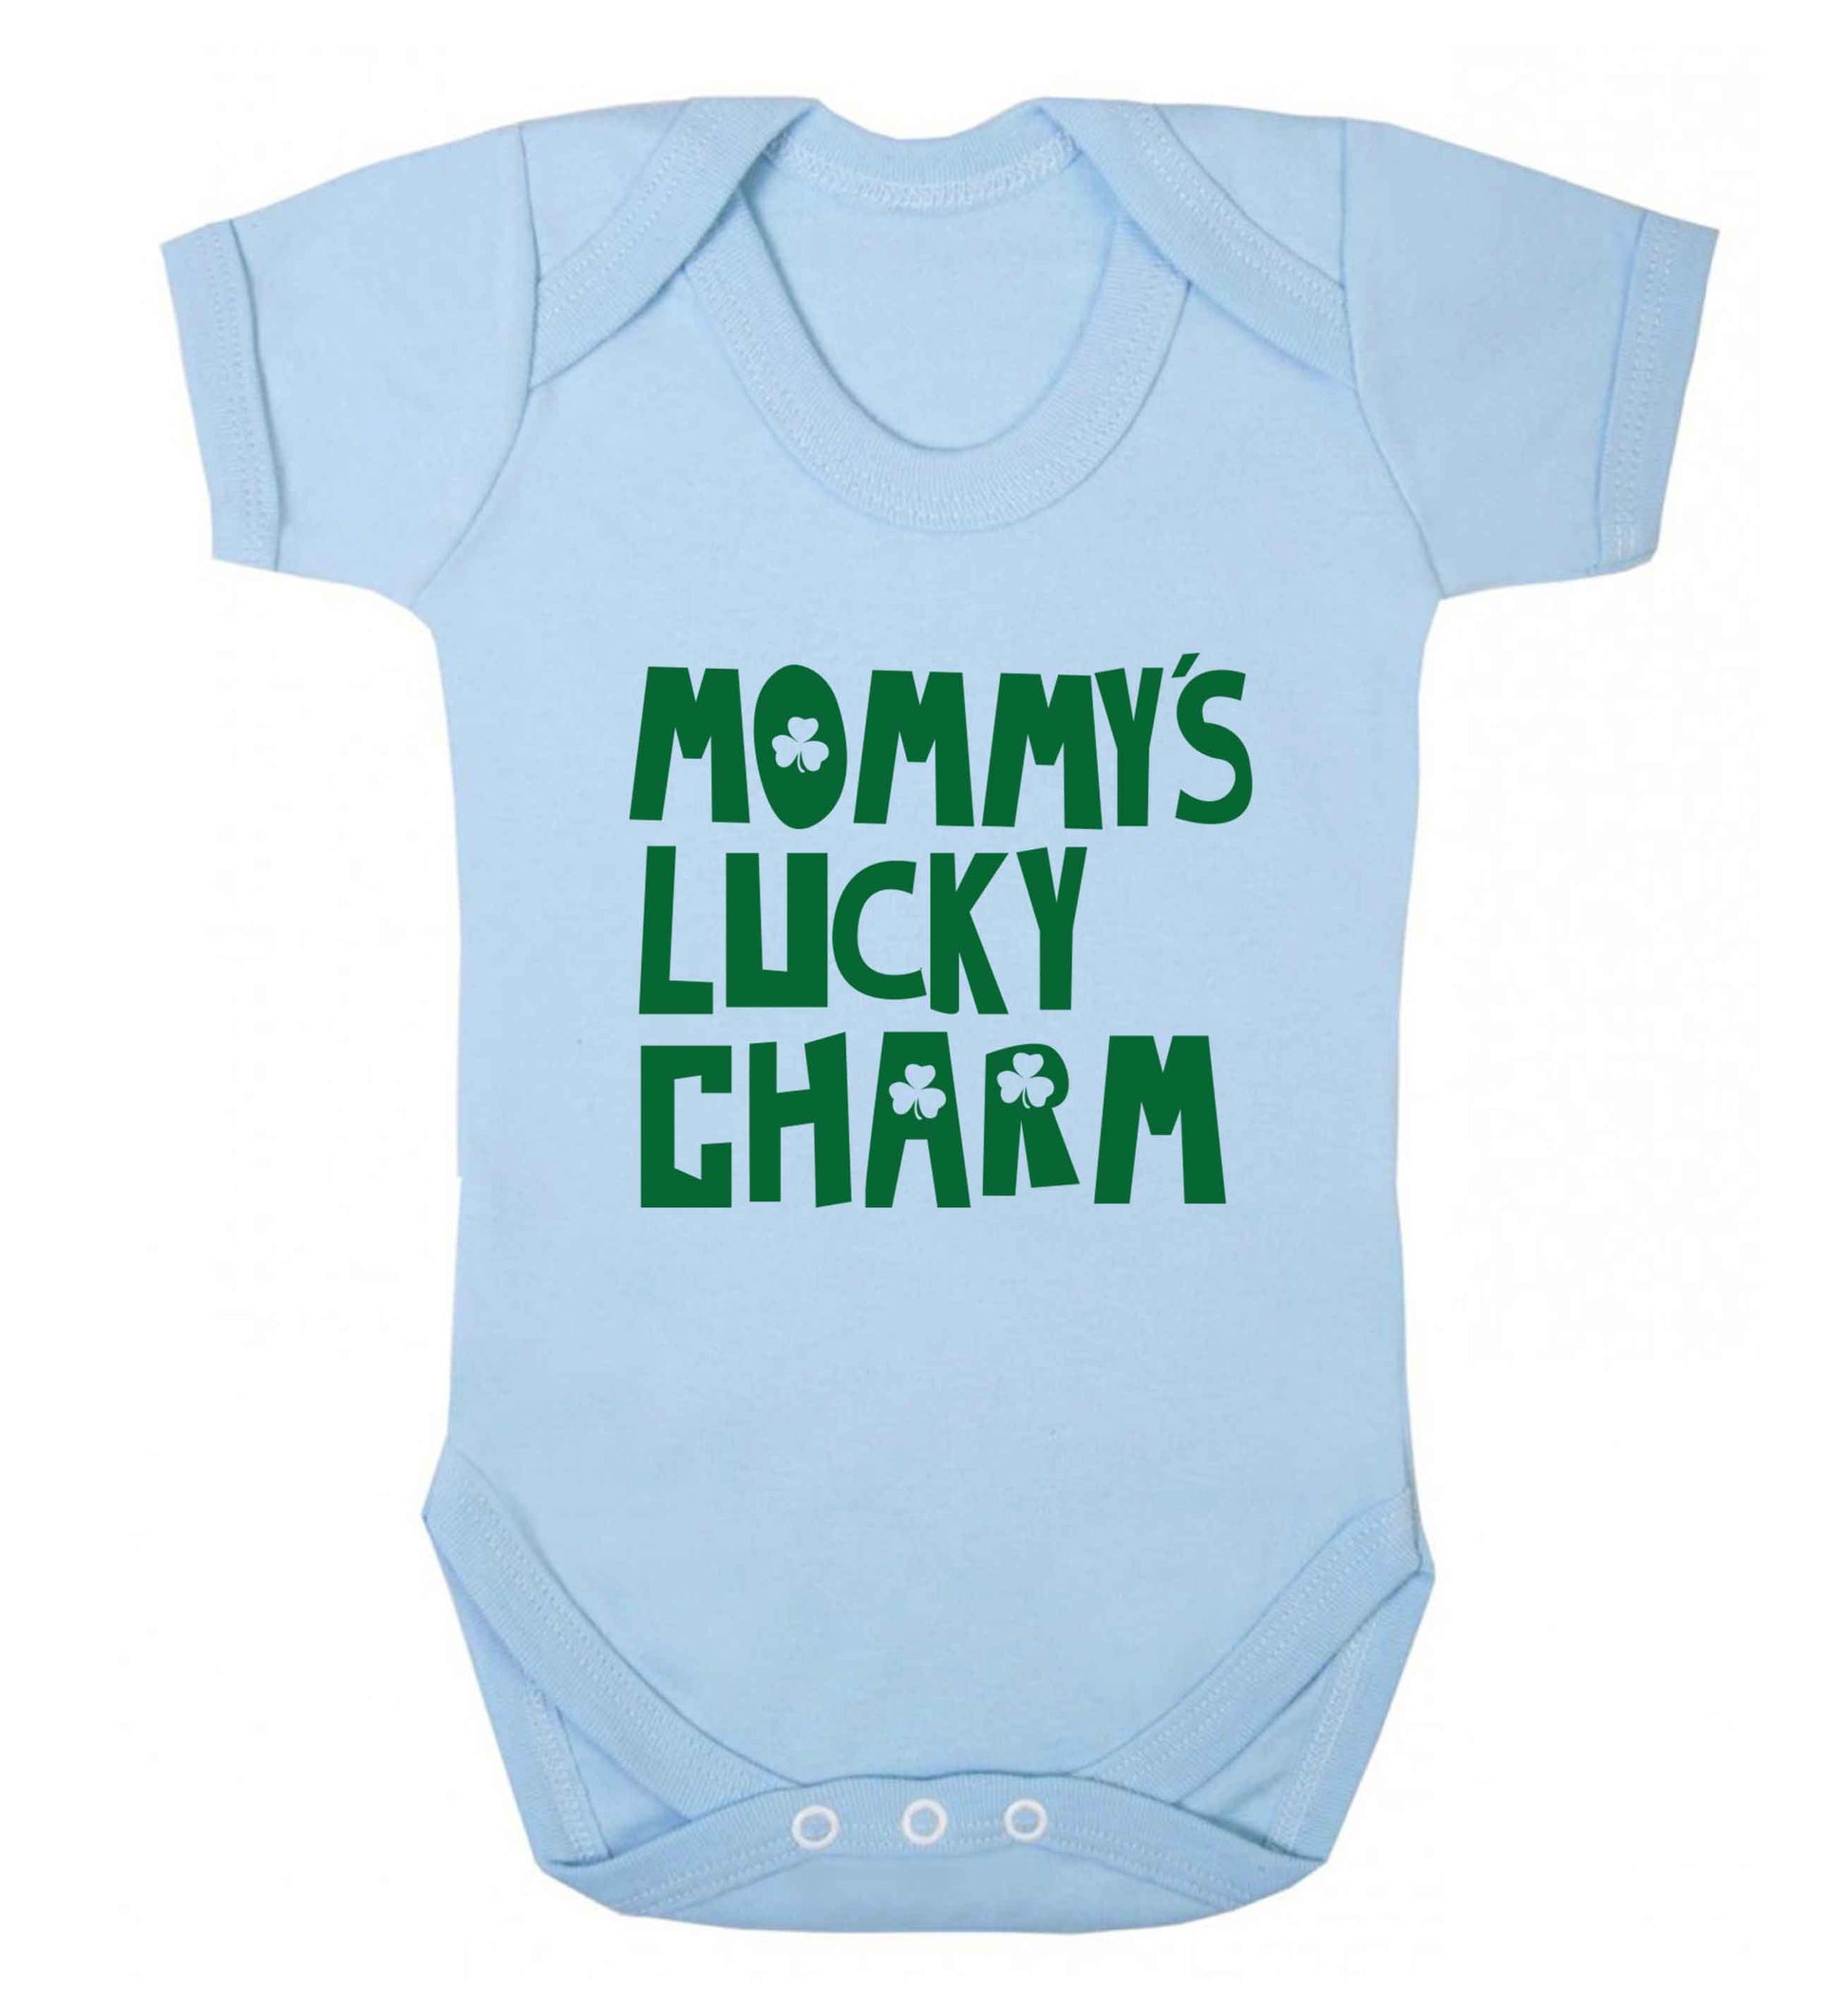 Mommy's lucky charm baby vest pale blue 18-24 months